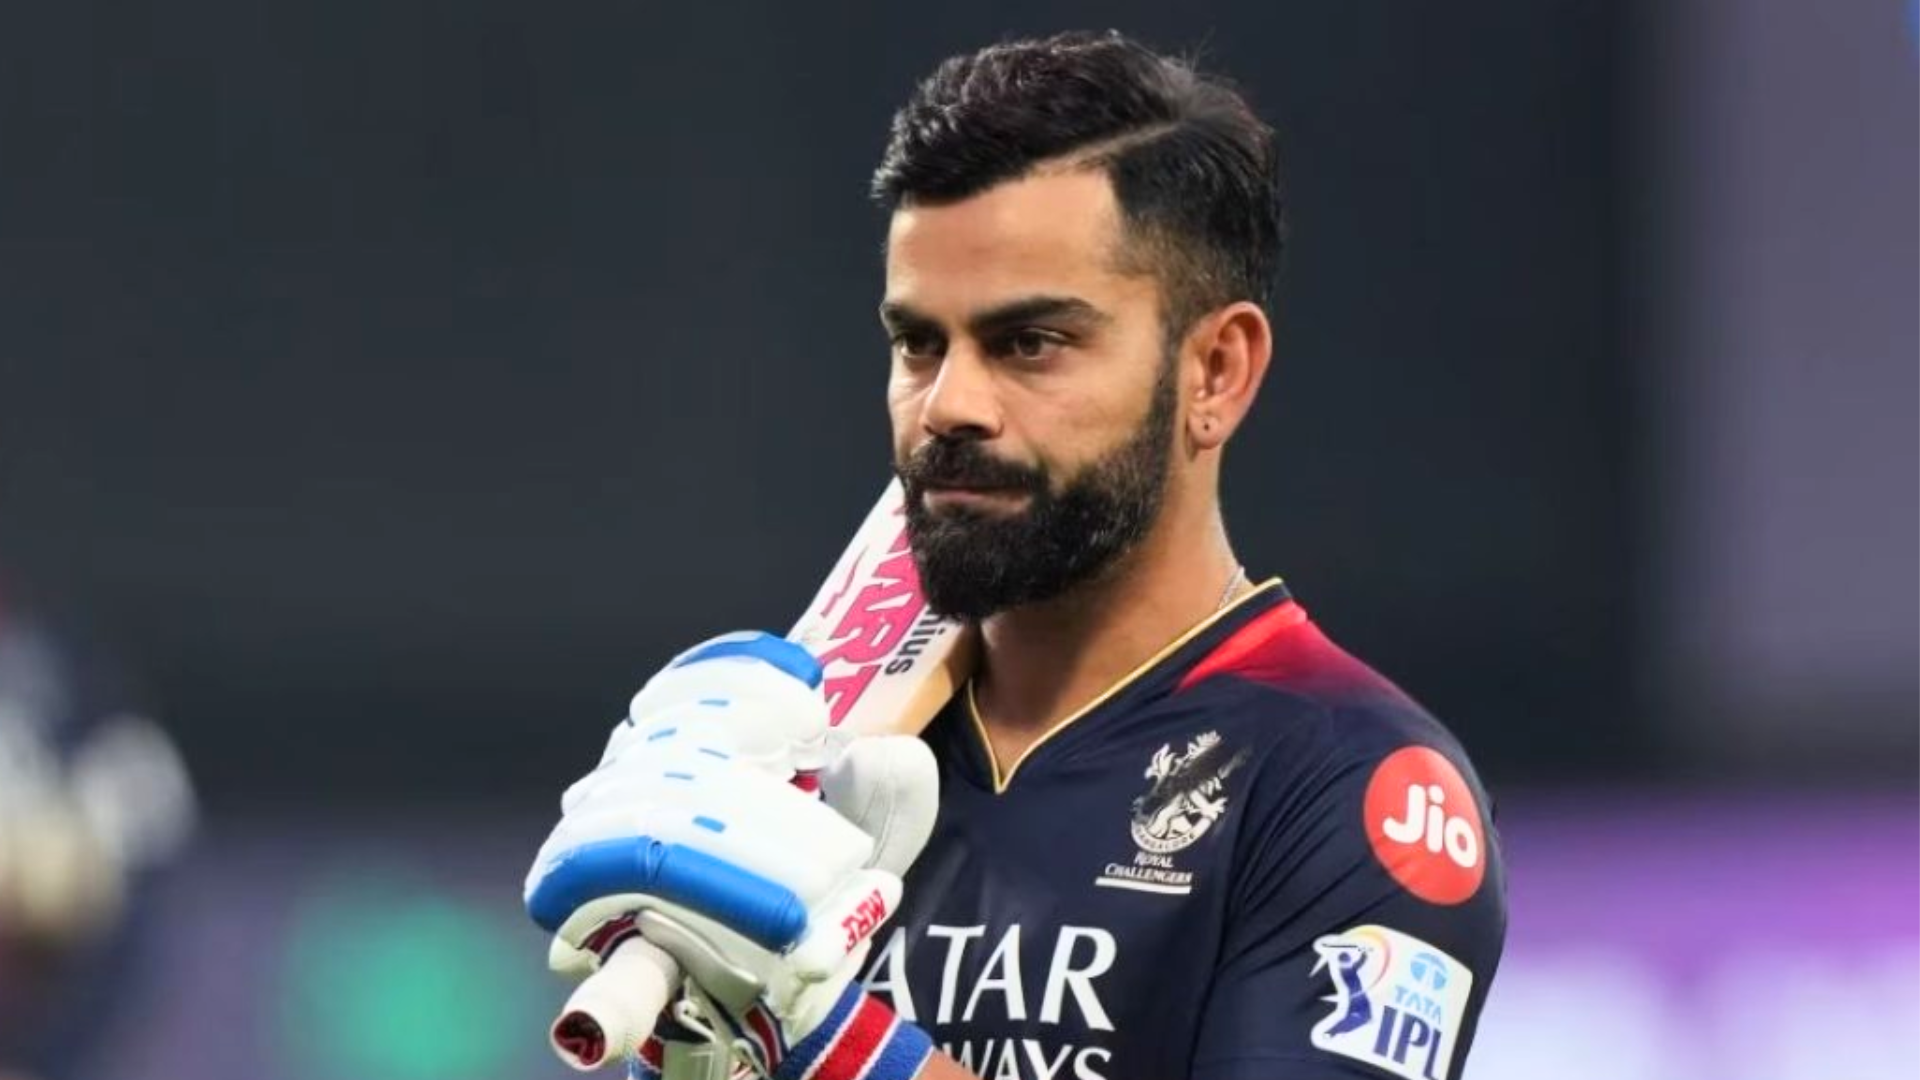 Virat Kohli Urges His Fans To Not Call Him As ‘King’: “You Need To Stop Calling Me That Word”